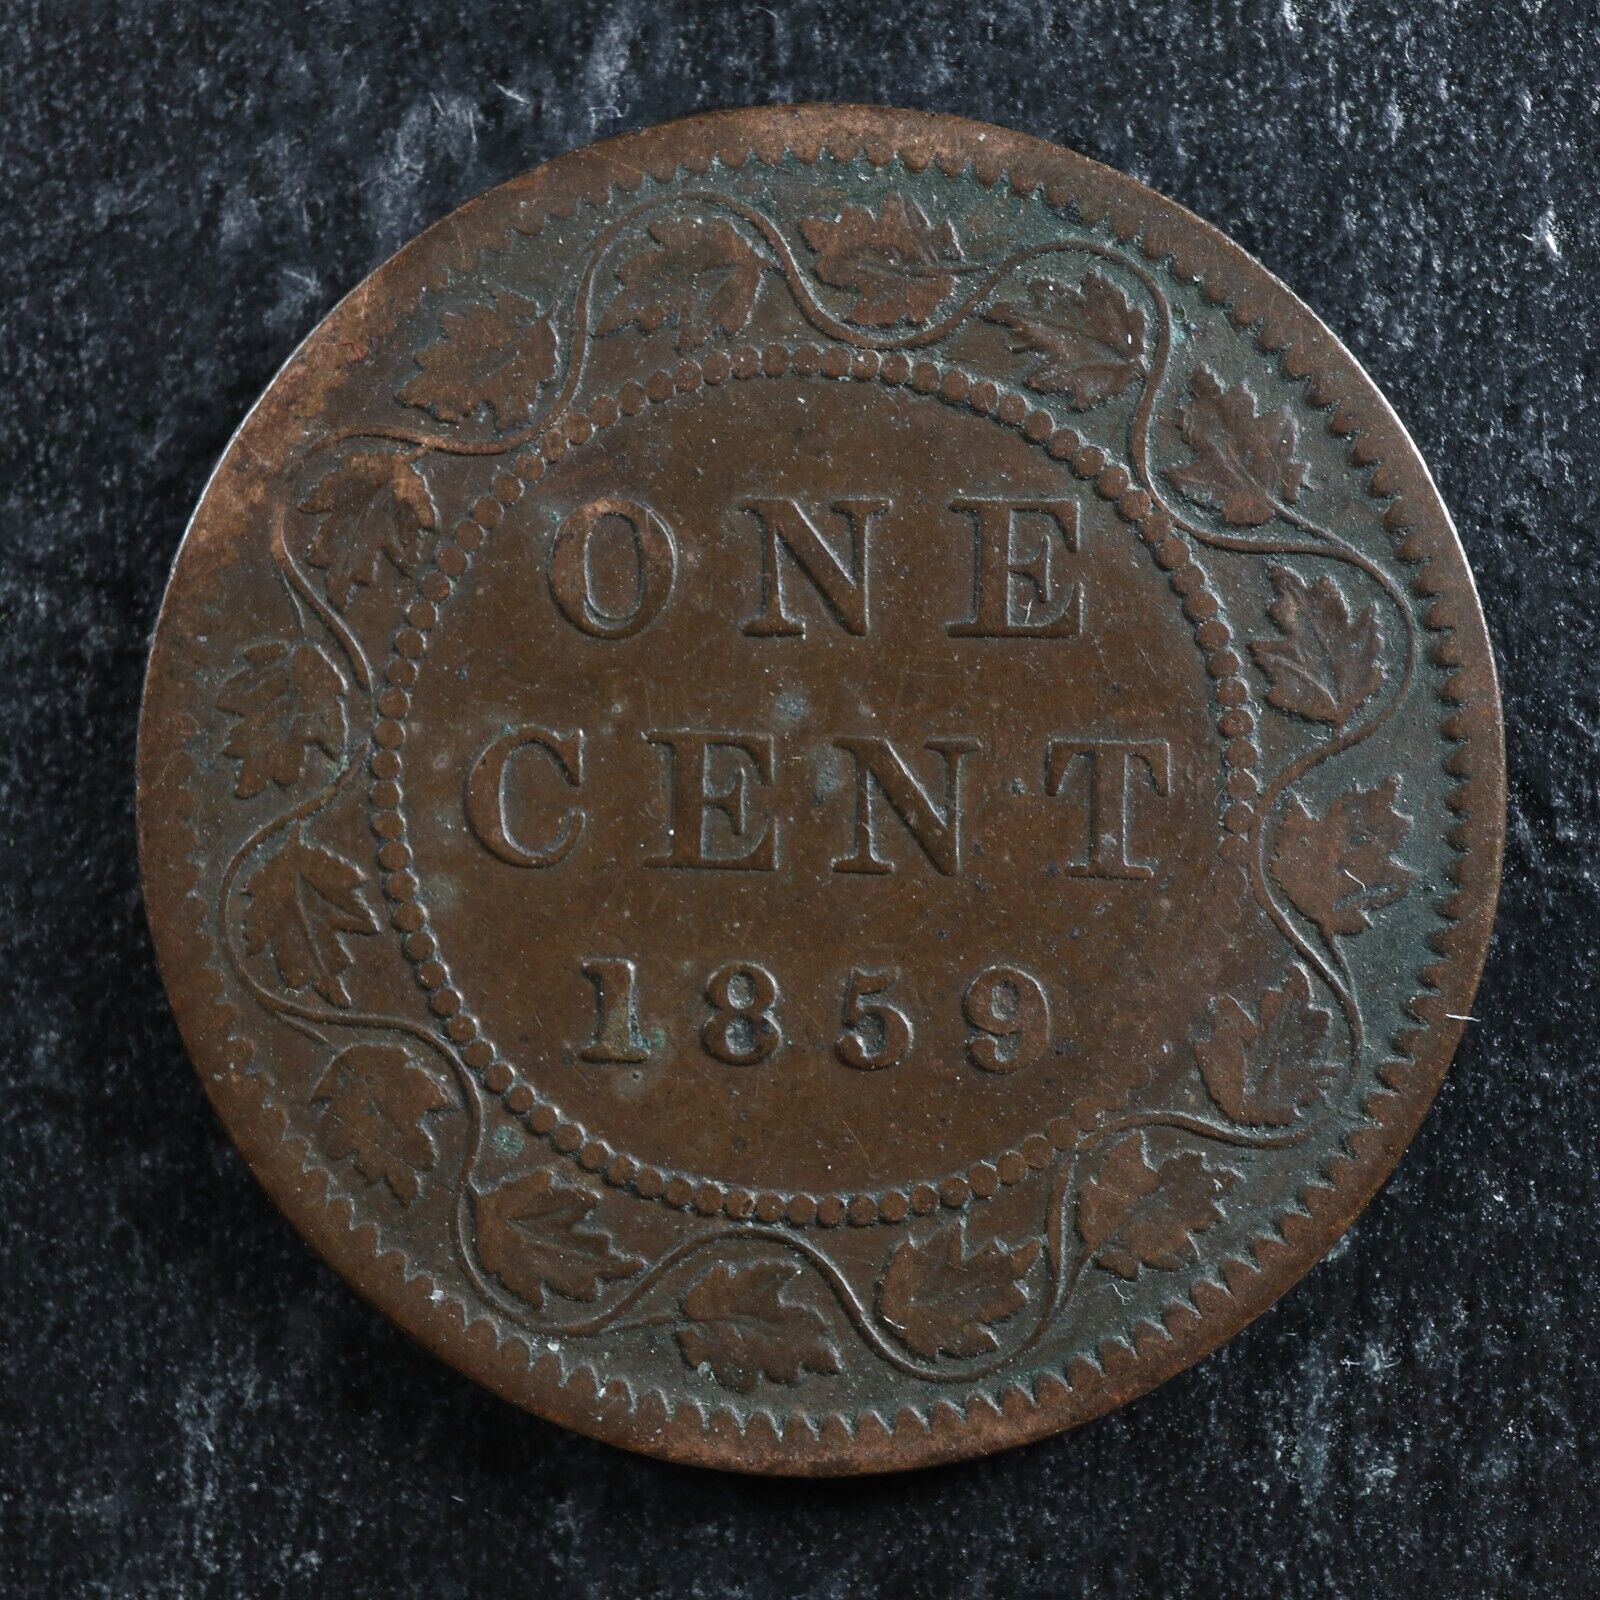 1 cent 1859/8 Wide 9 Canada one large penny Queen Victoria c ¢ VG